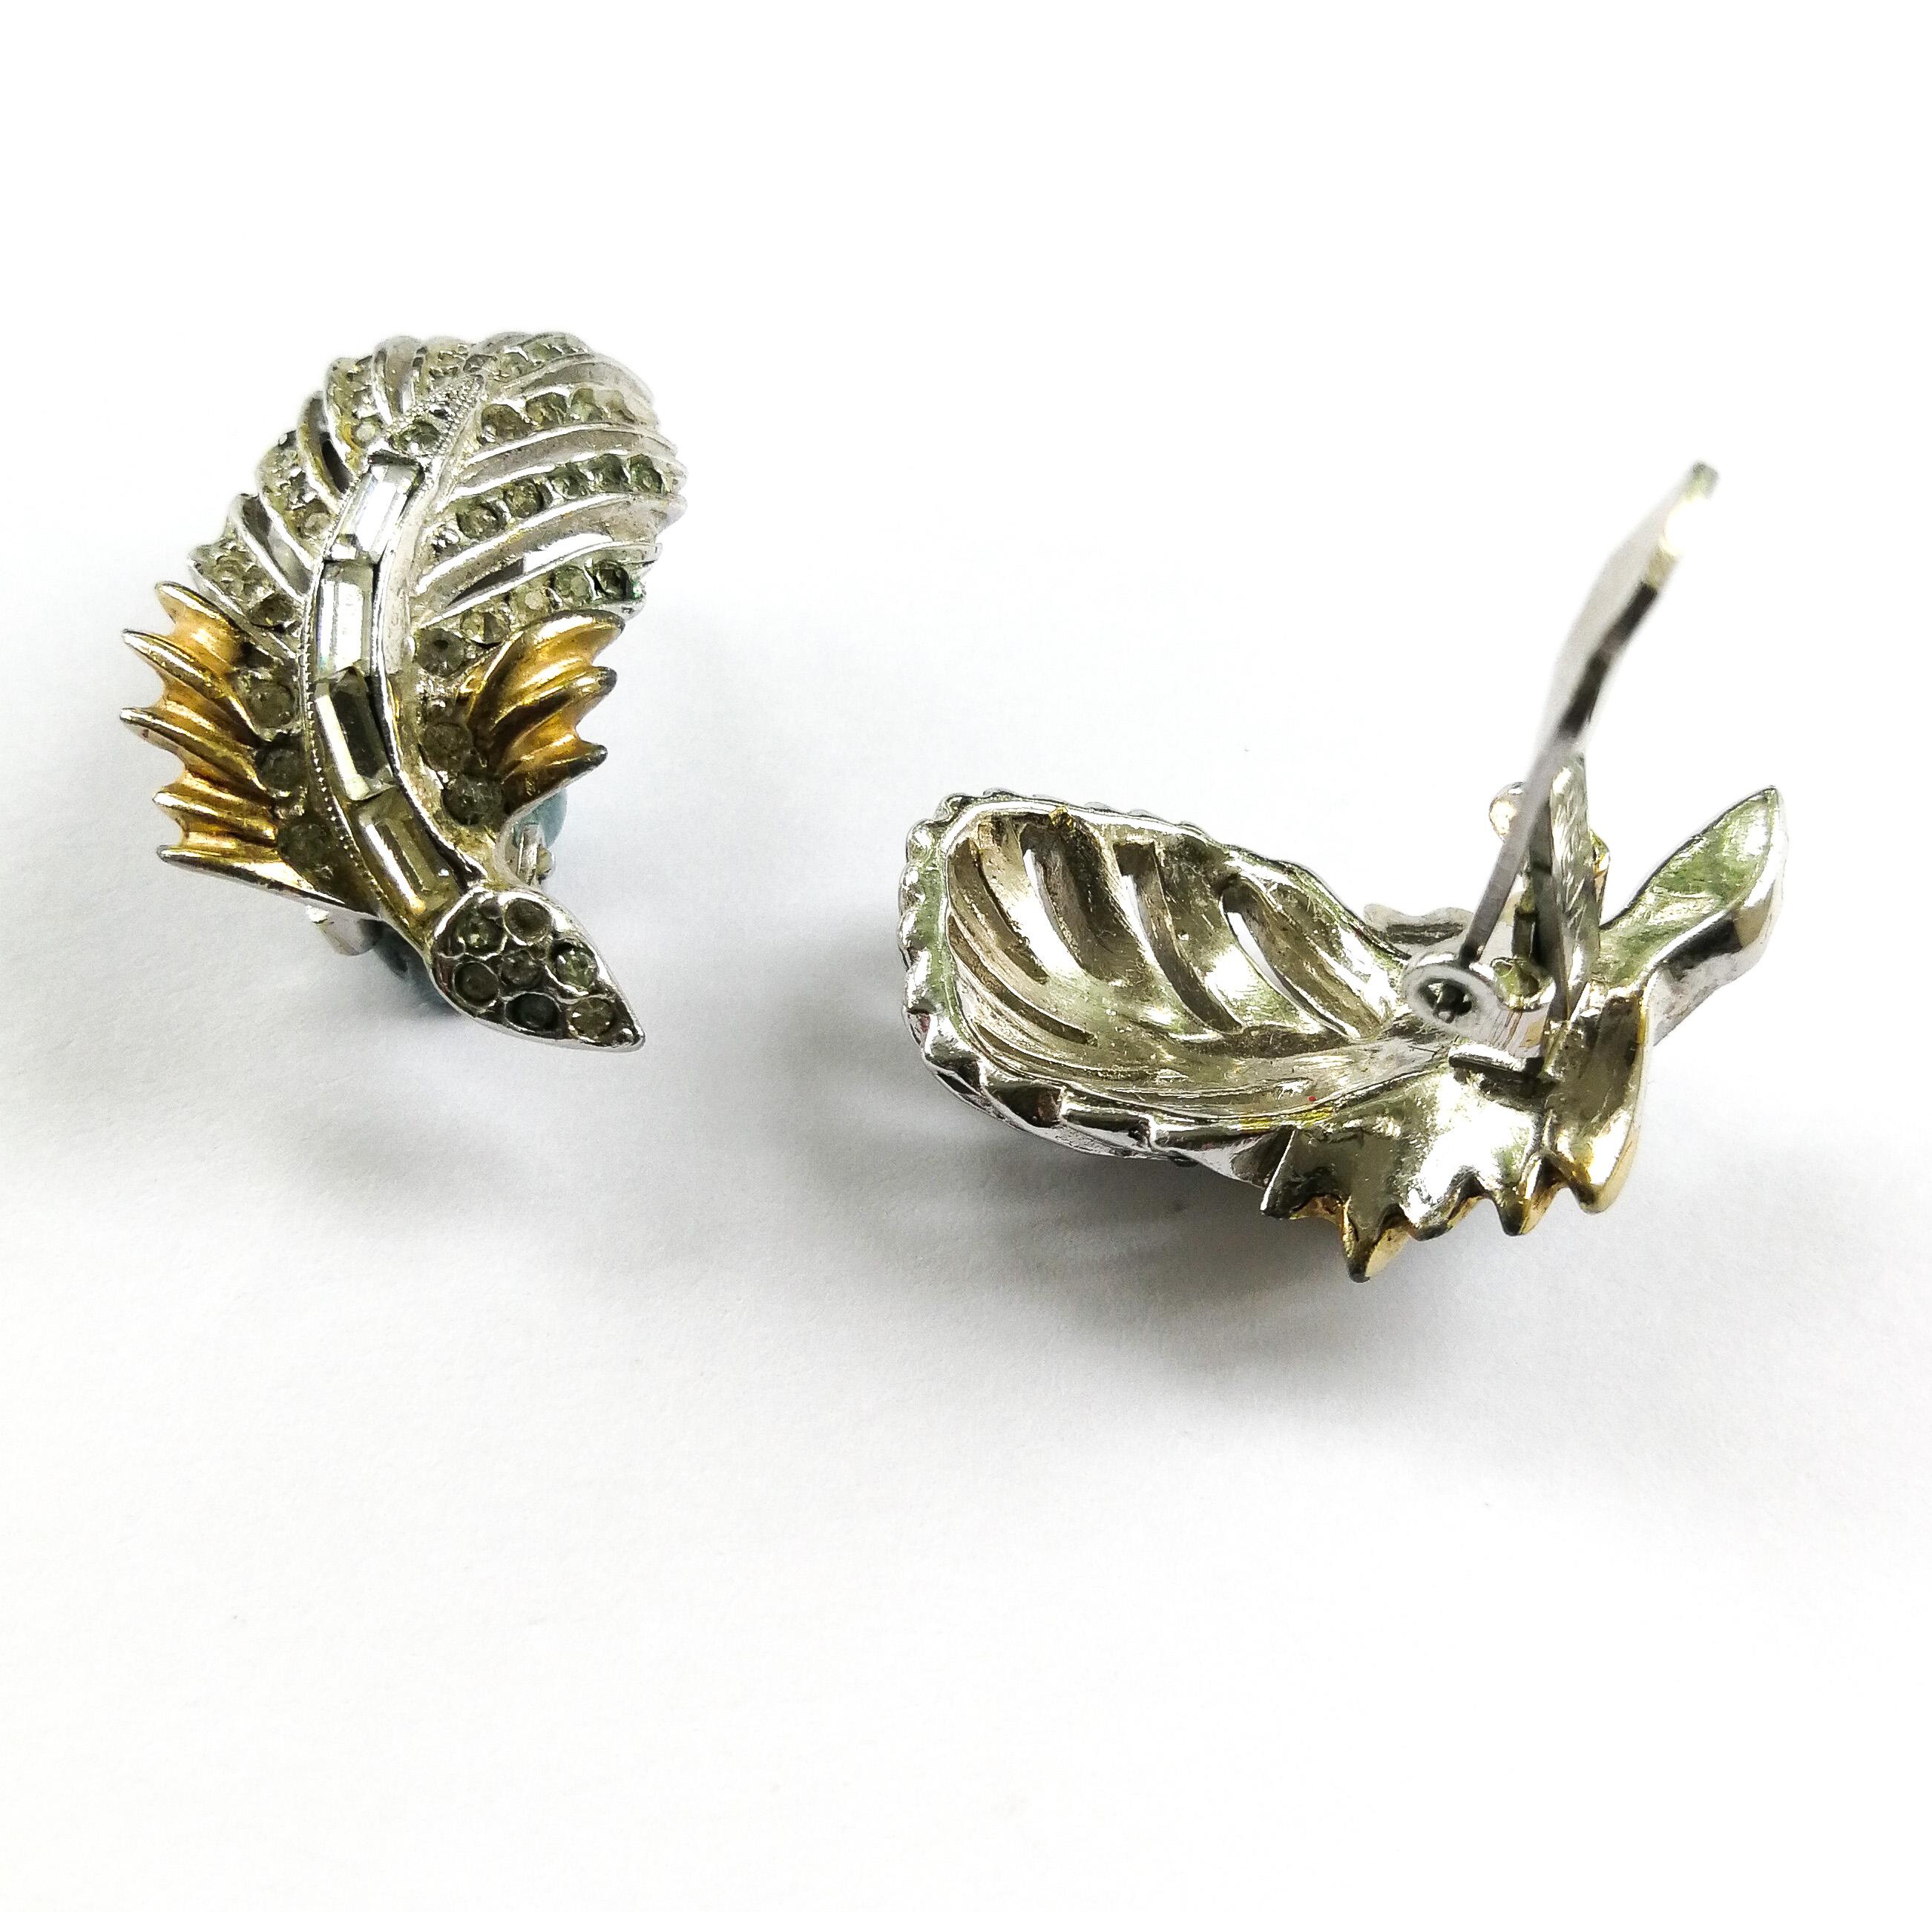 A  charming and attractive pair of earrings, in the form of a 'feather', made from clear pastes and gilded and silvered metal, from Reja, in the 1940s. With a mixture of baguette and round pastes, these are set in two coloured metals, the feathering